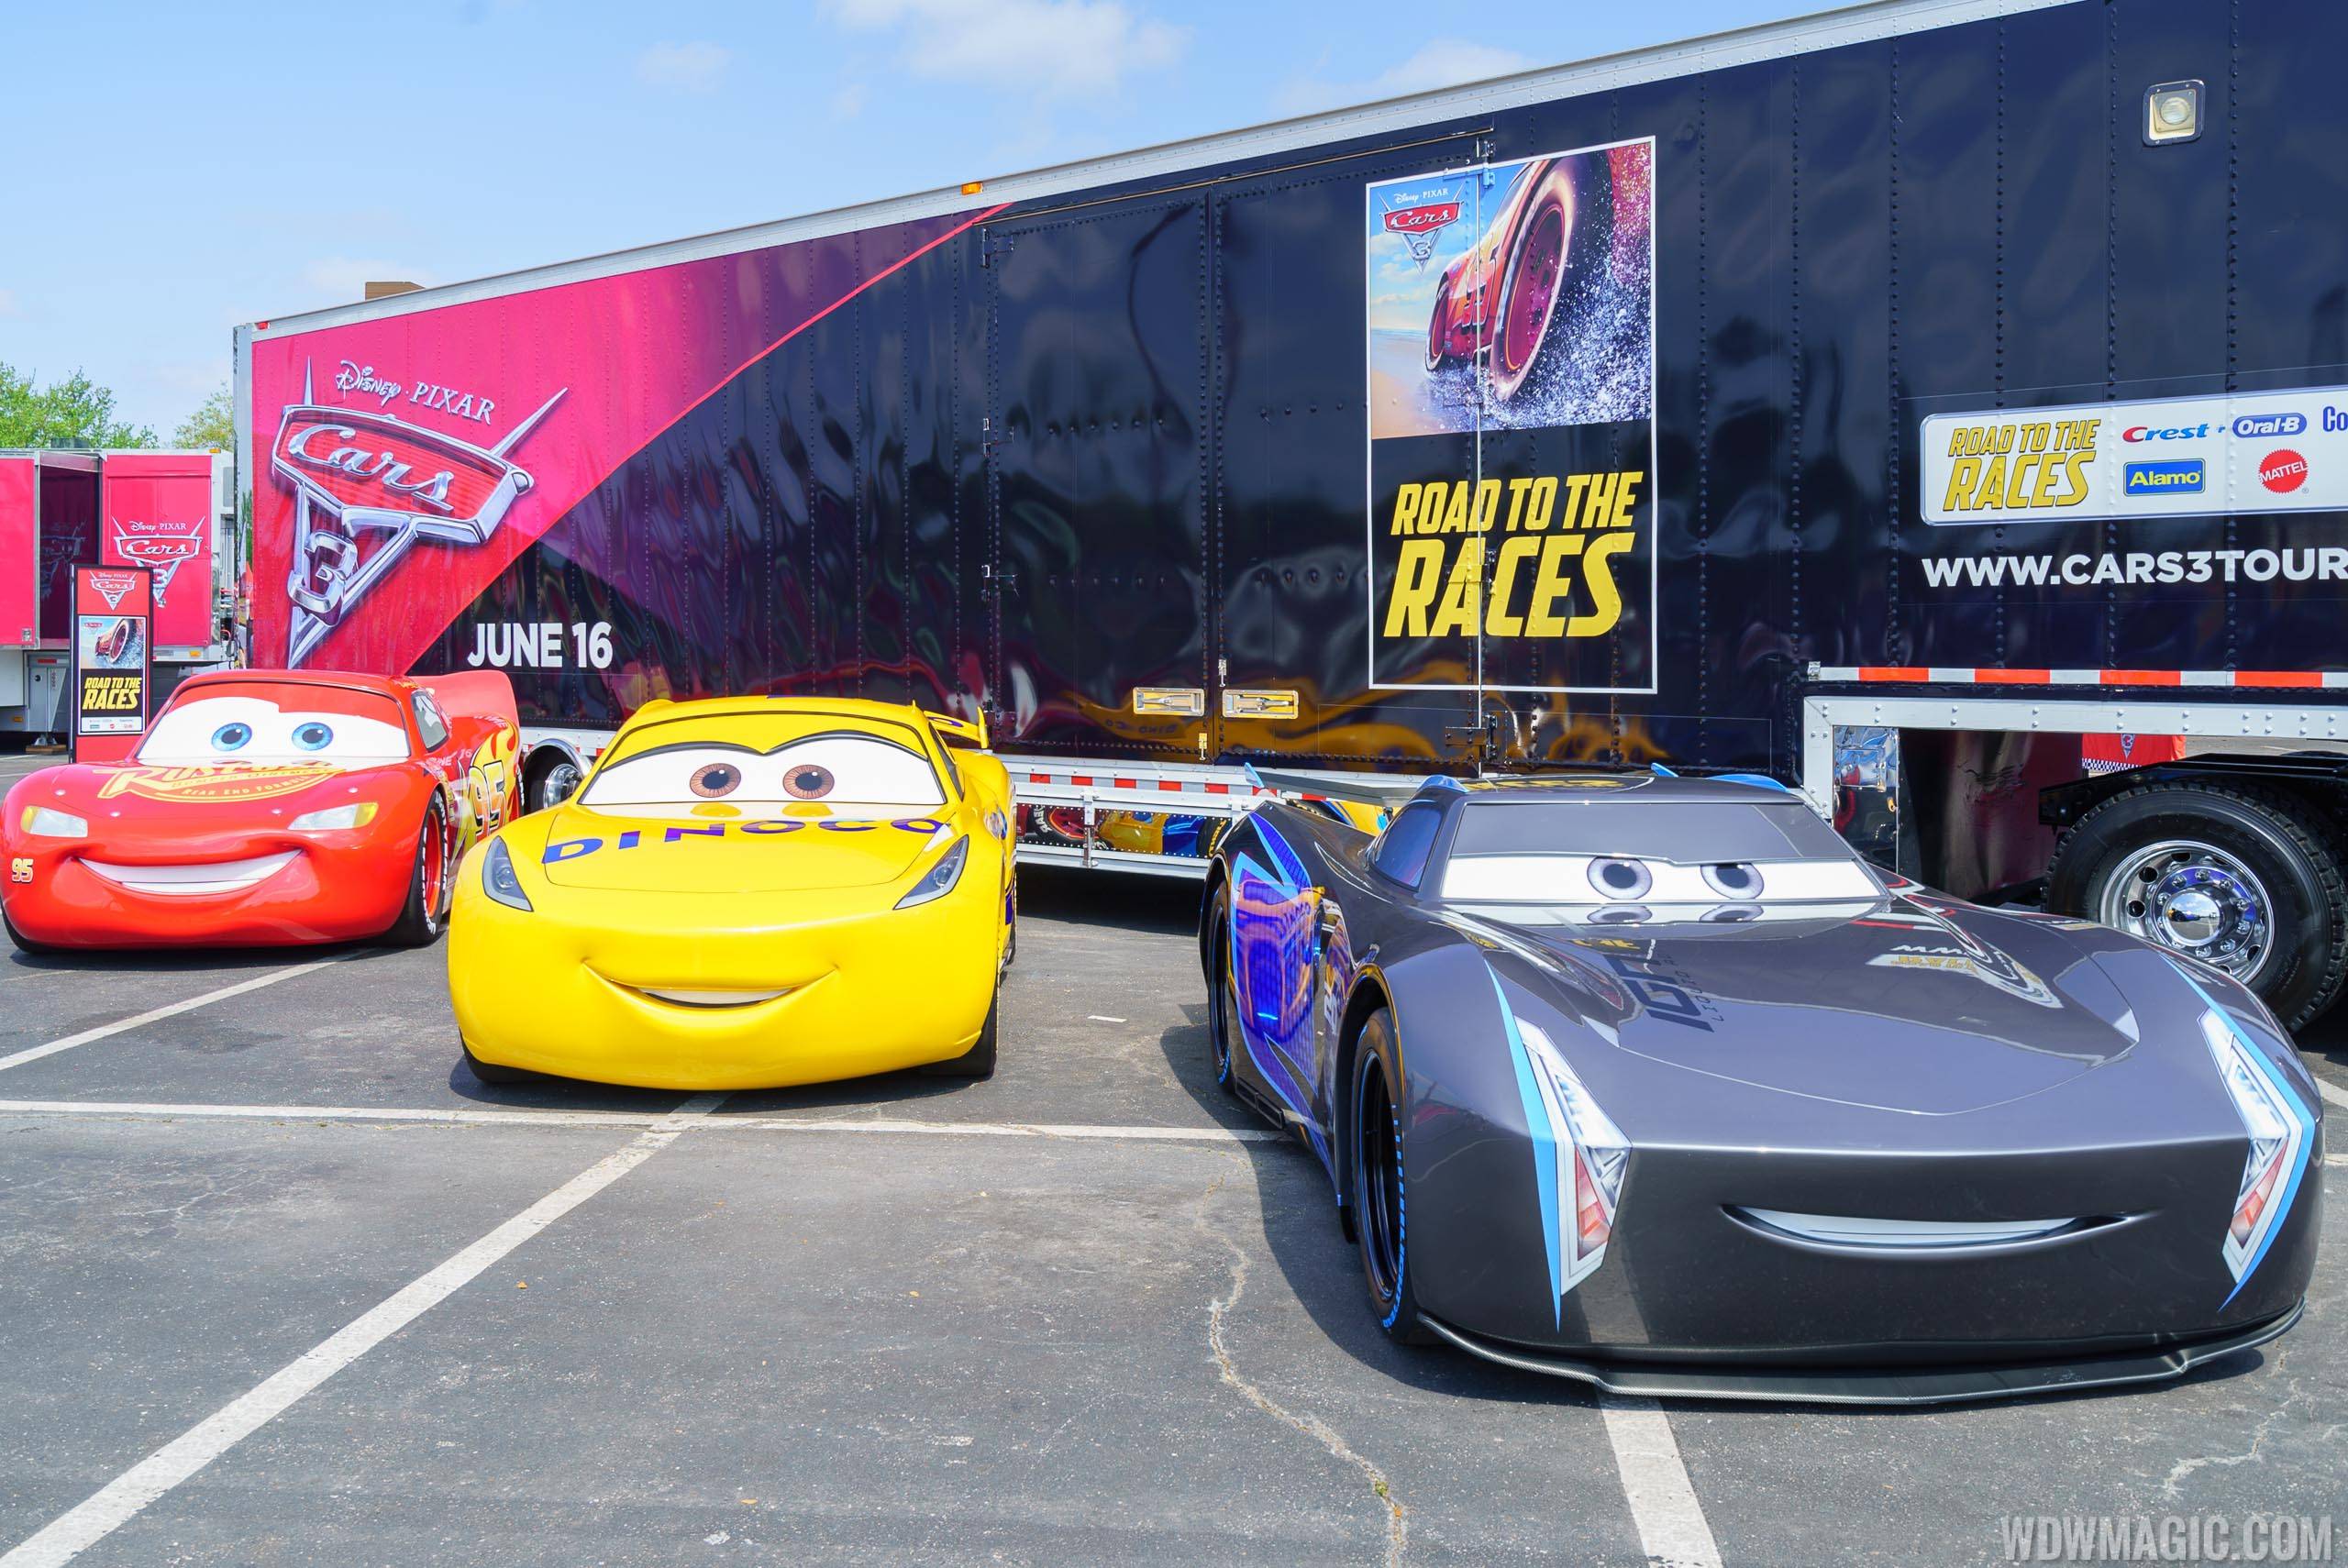 Cars 3 Road to the Races